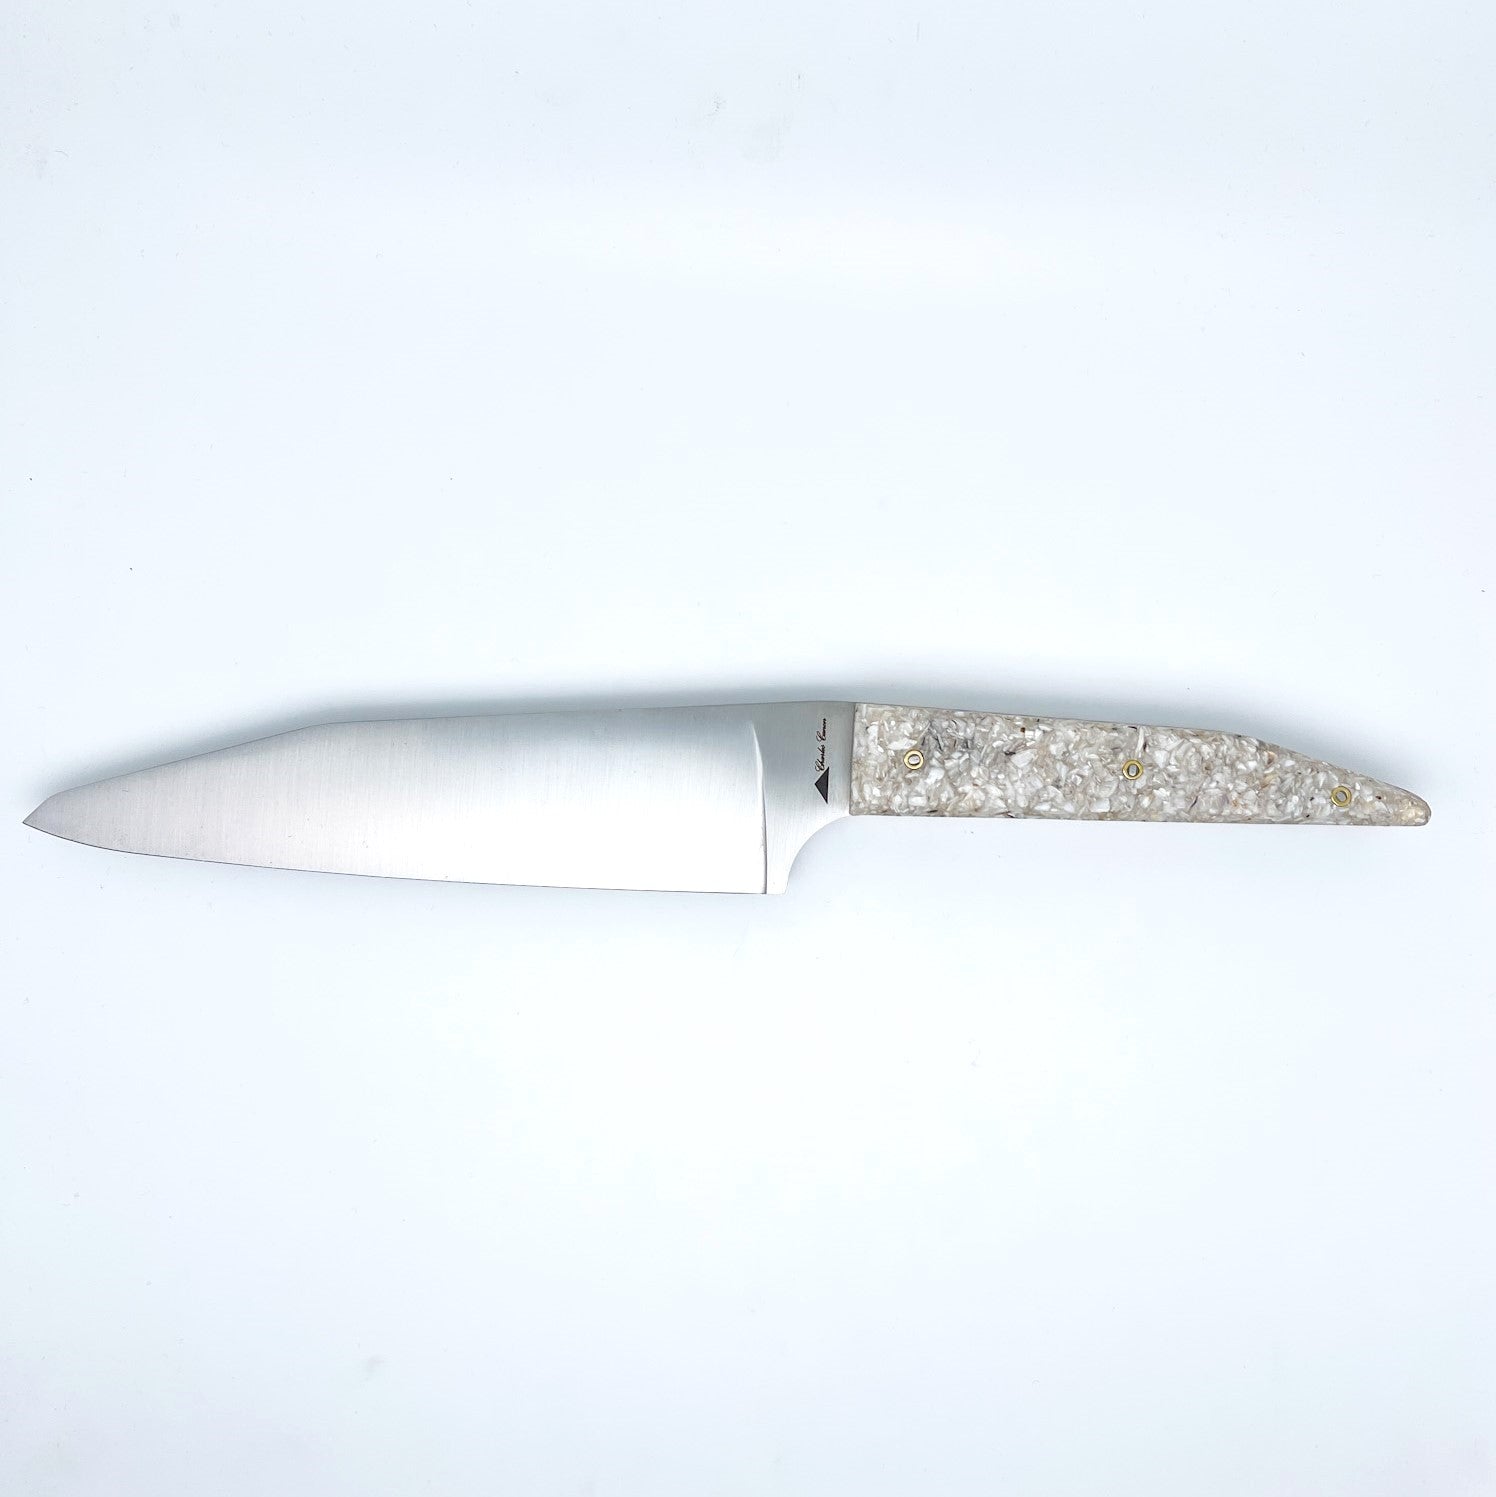 Chef's knife with oyster shell handle